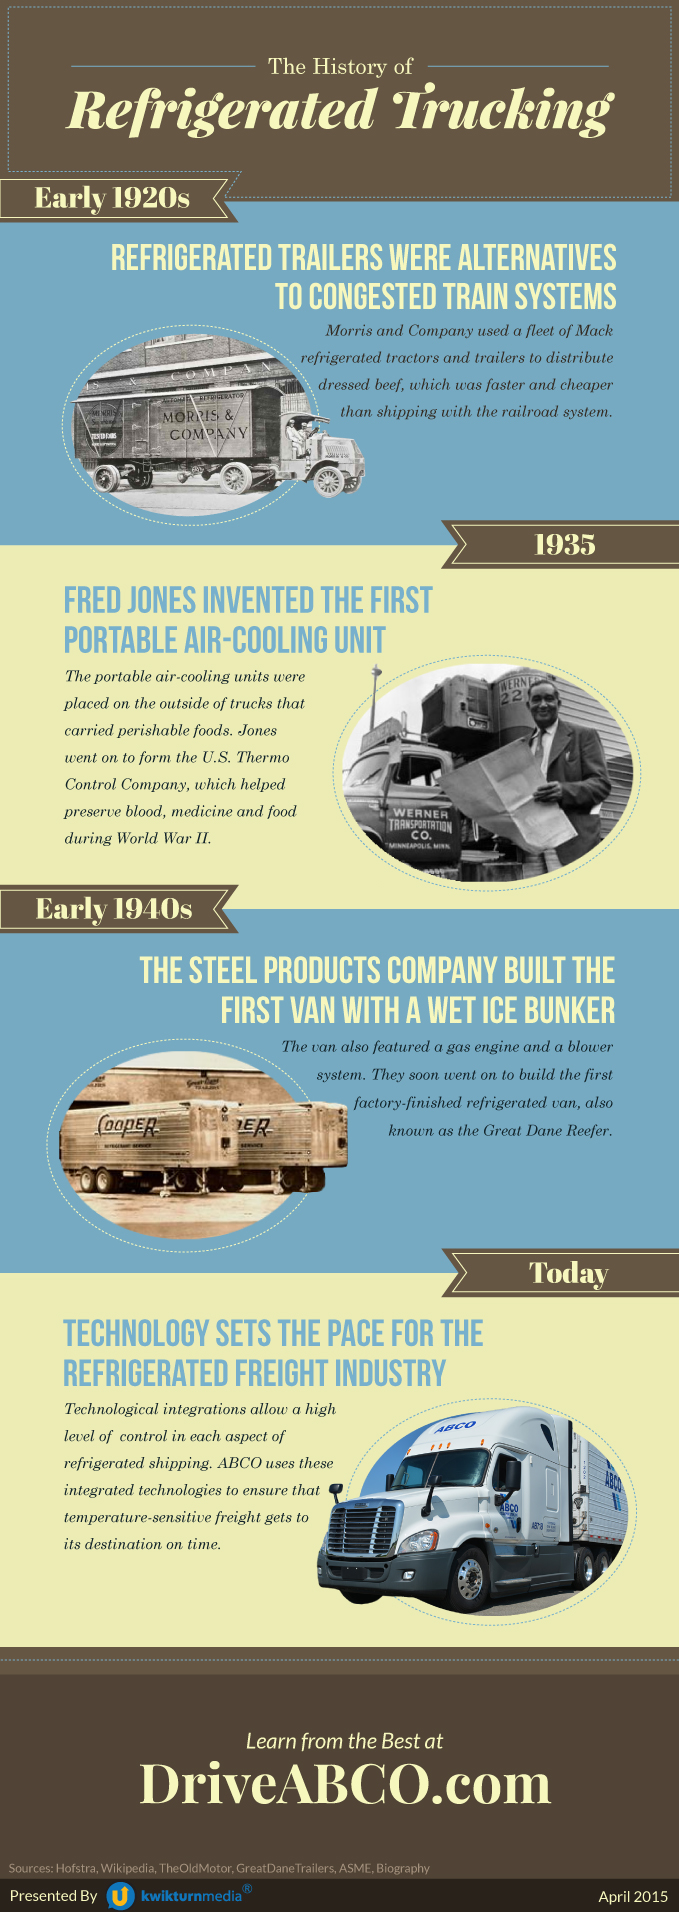 The History of Refrigerated Trucking